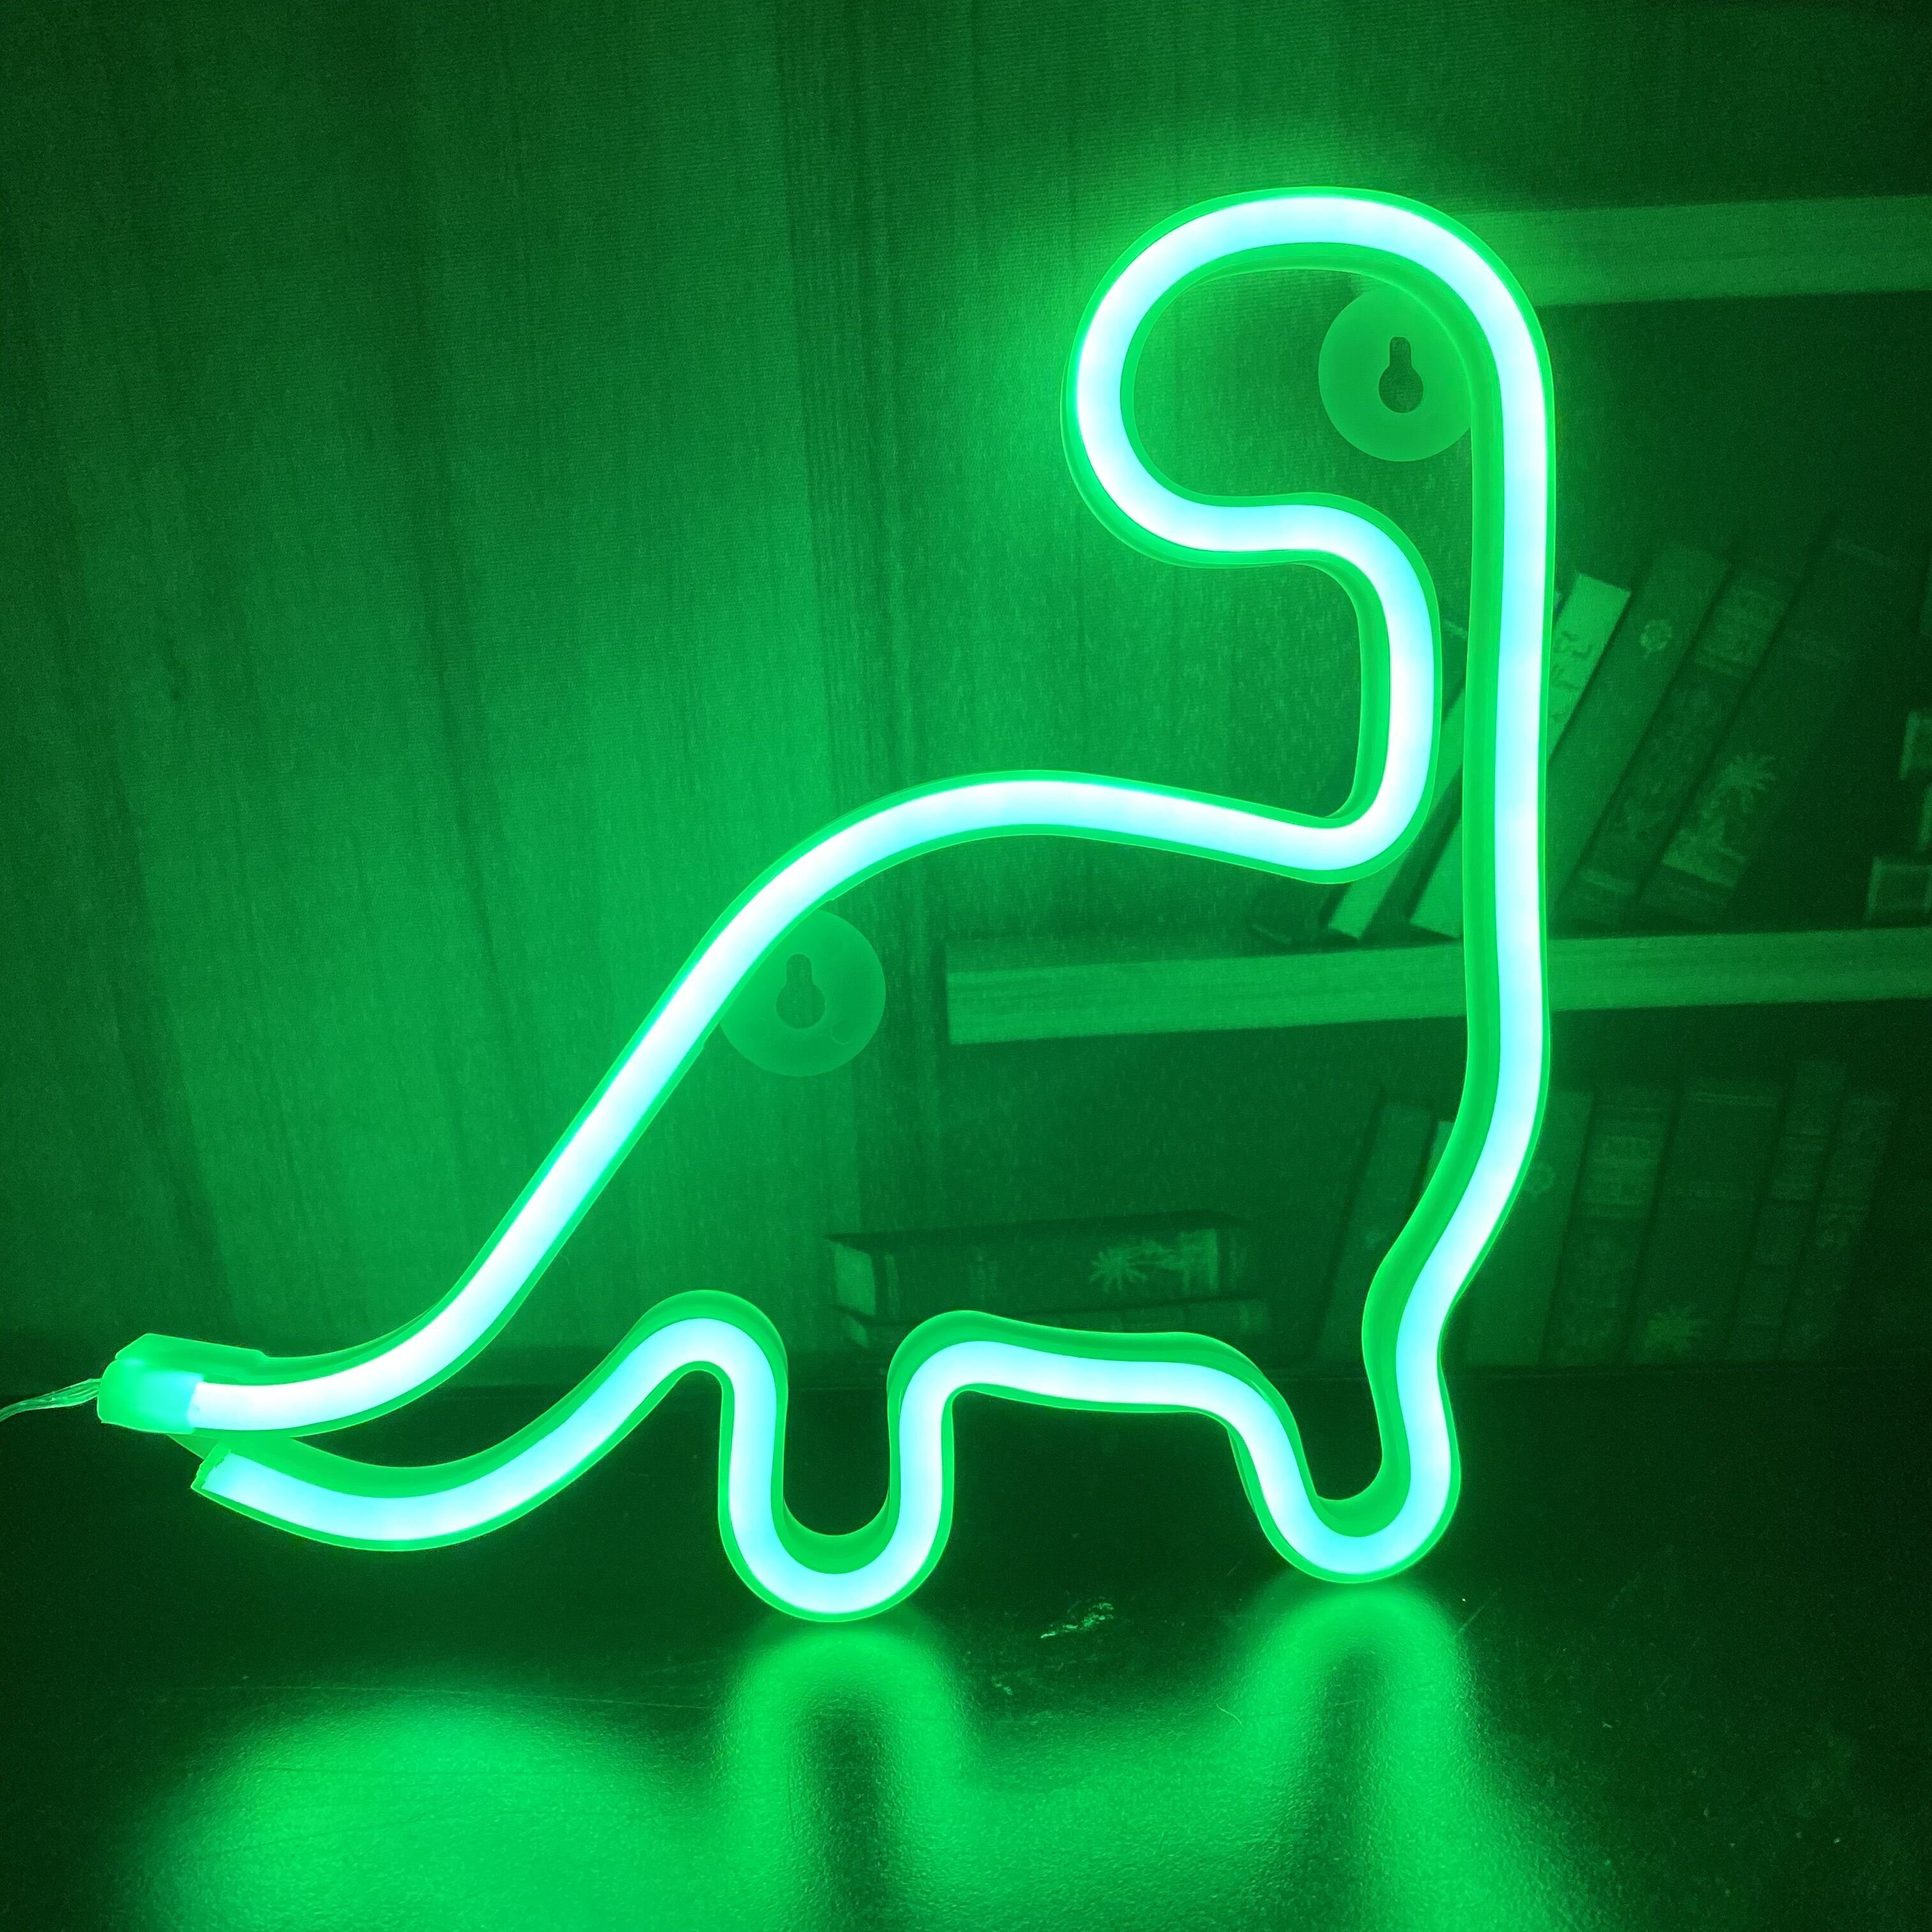 Decorqiao Dinosaur Neon Sign Night Light For Kids Gifts LED Dino Neon Lamp For Wall Decor Bedroom Decorations Home Party Holiday Decor Battery Or USB Operated Table Night Light Signs Back